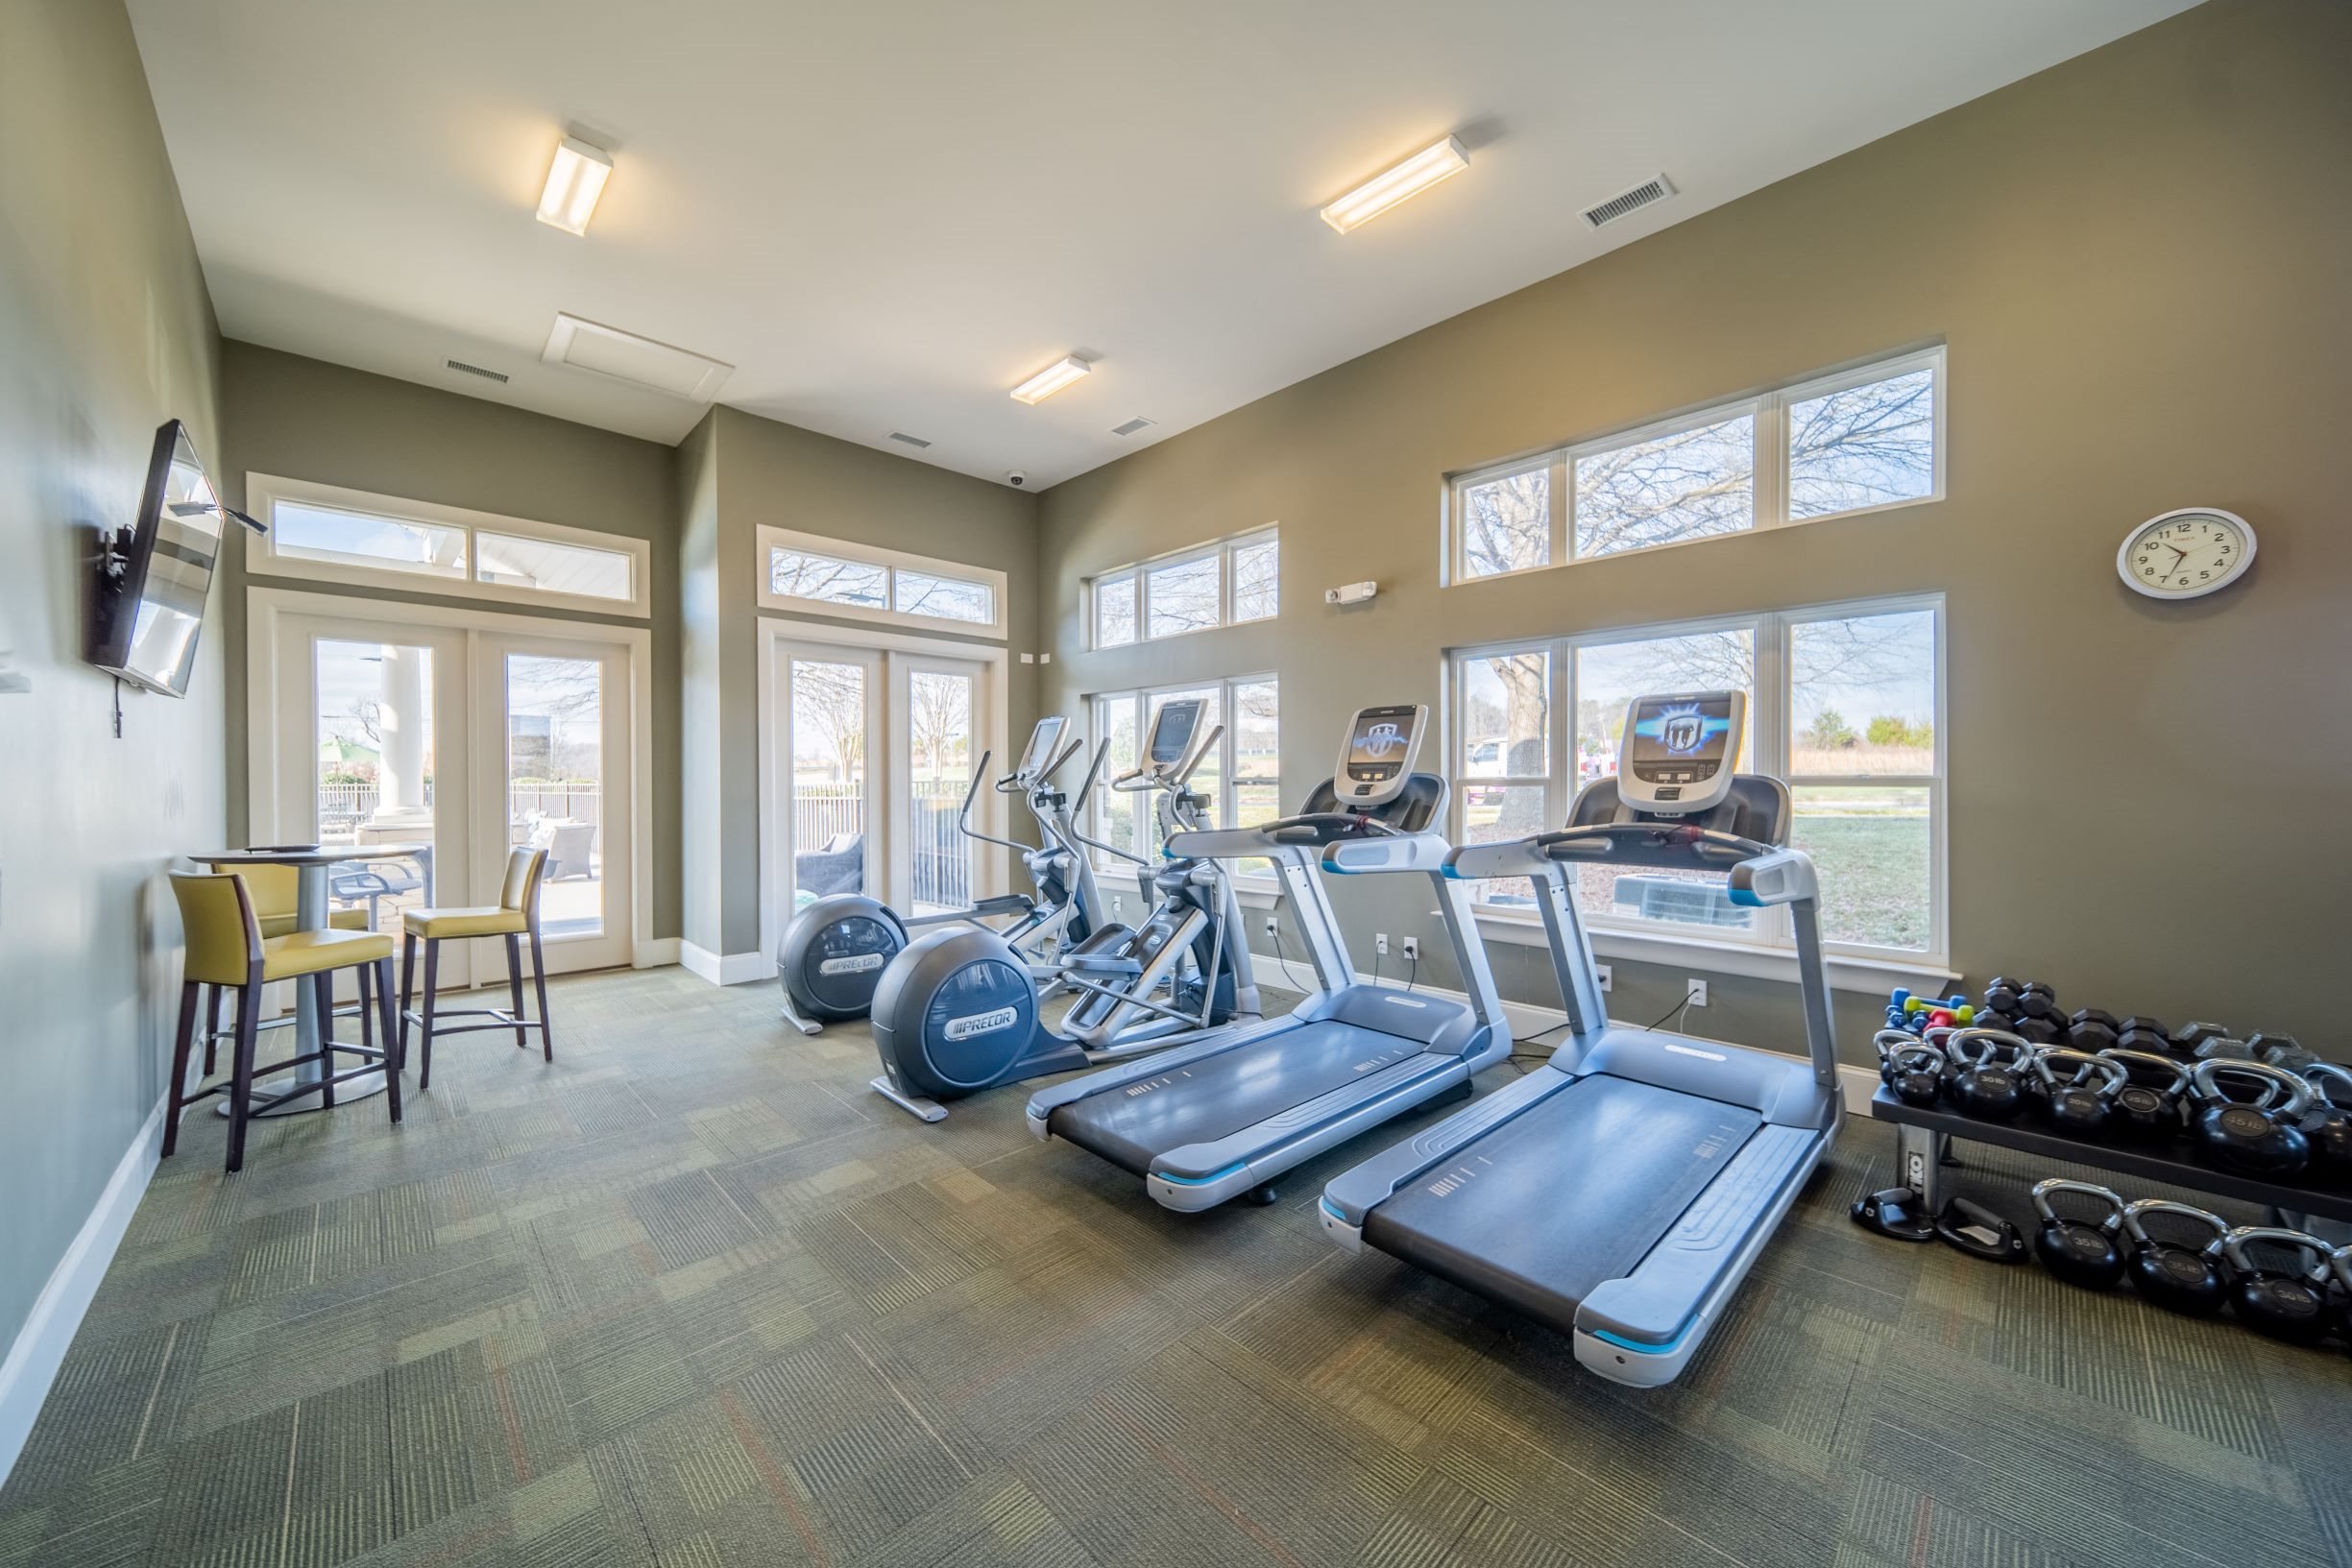 Fitness center at Piedmont Place apartments in Greensboro, NC